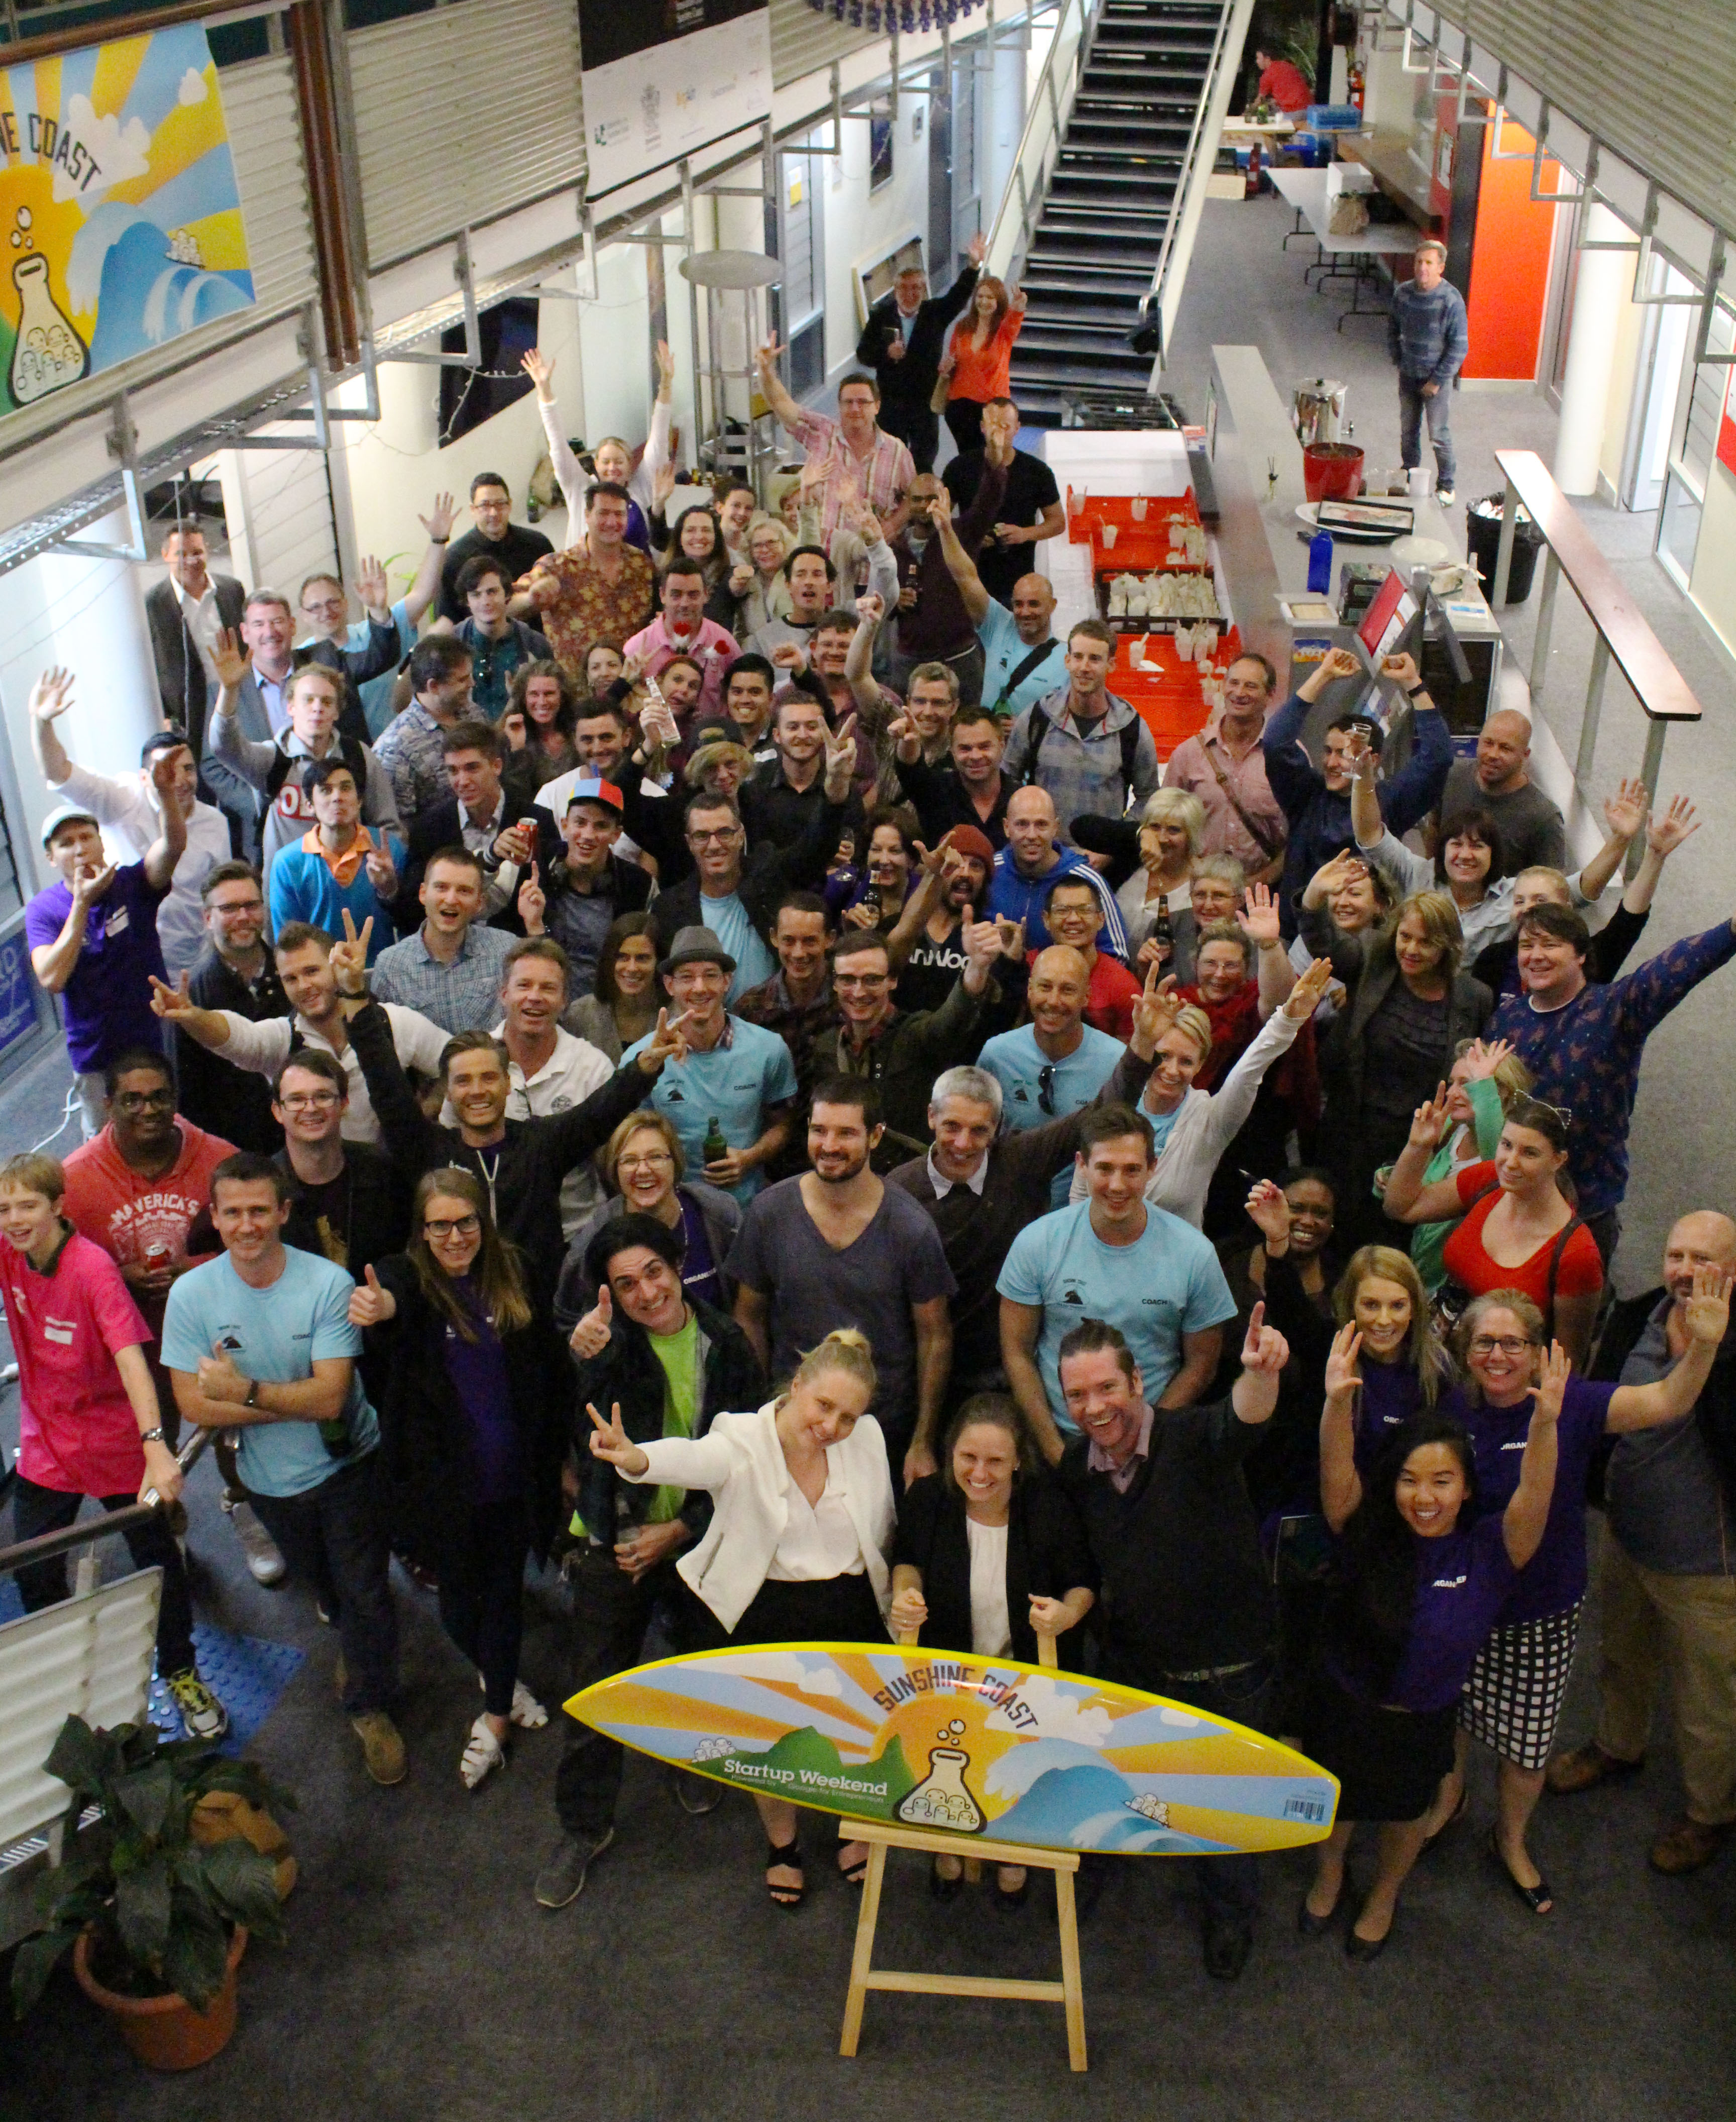 Hitched In wins Startup Weekend Sunshine Coast 2015